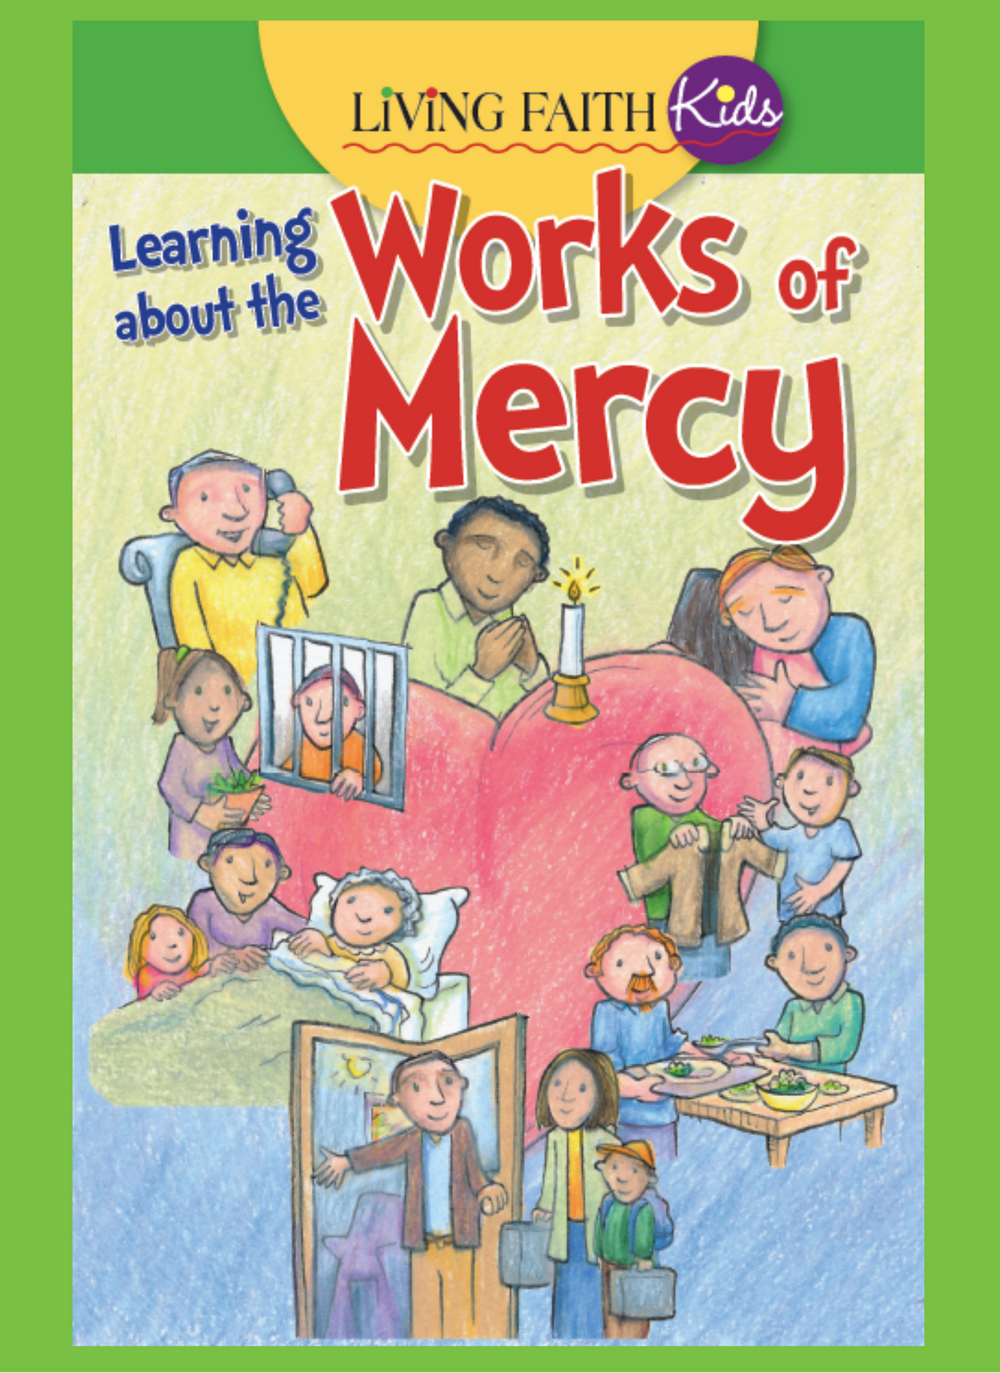 Learning About the Works of Mercy